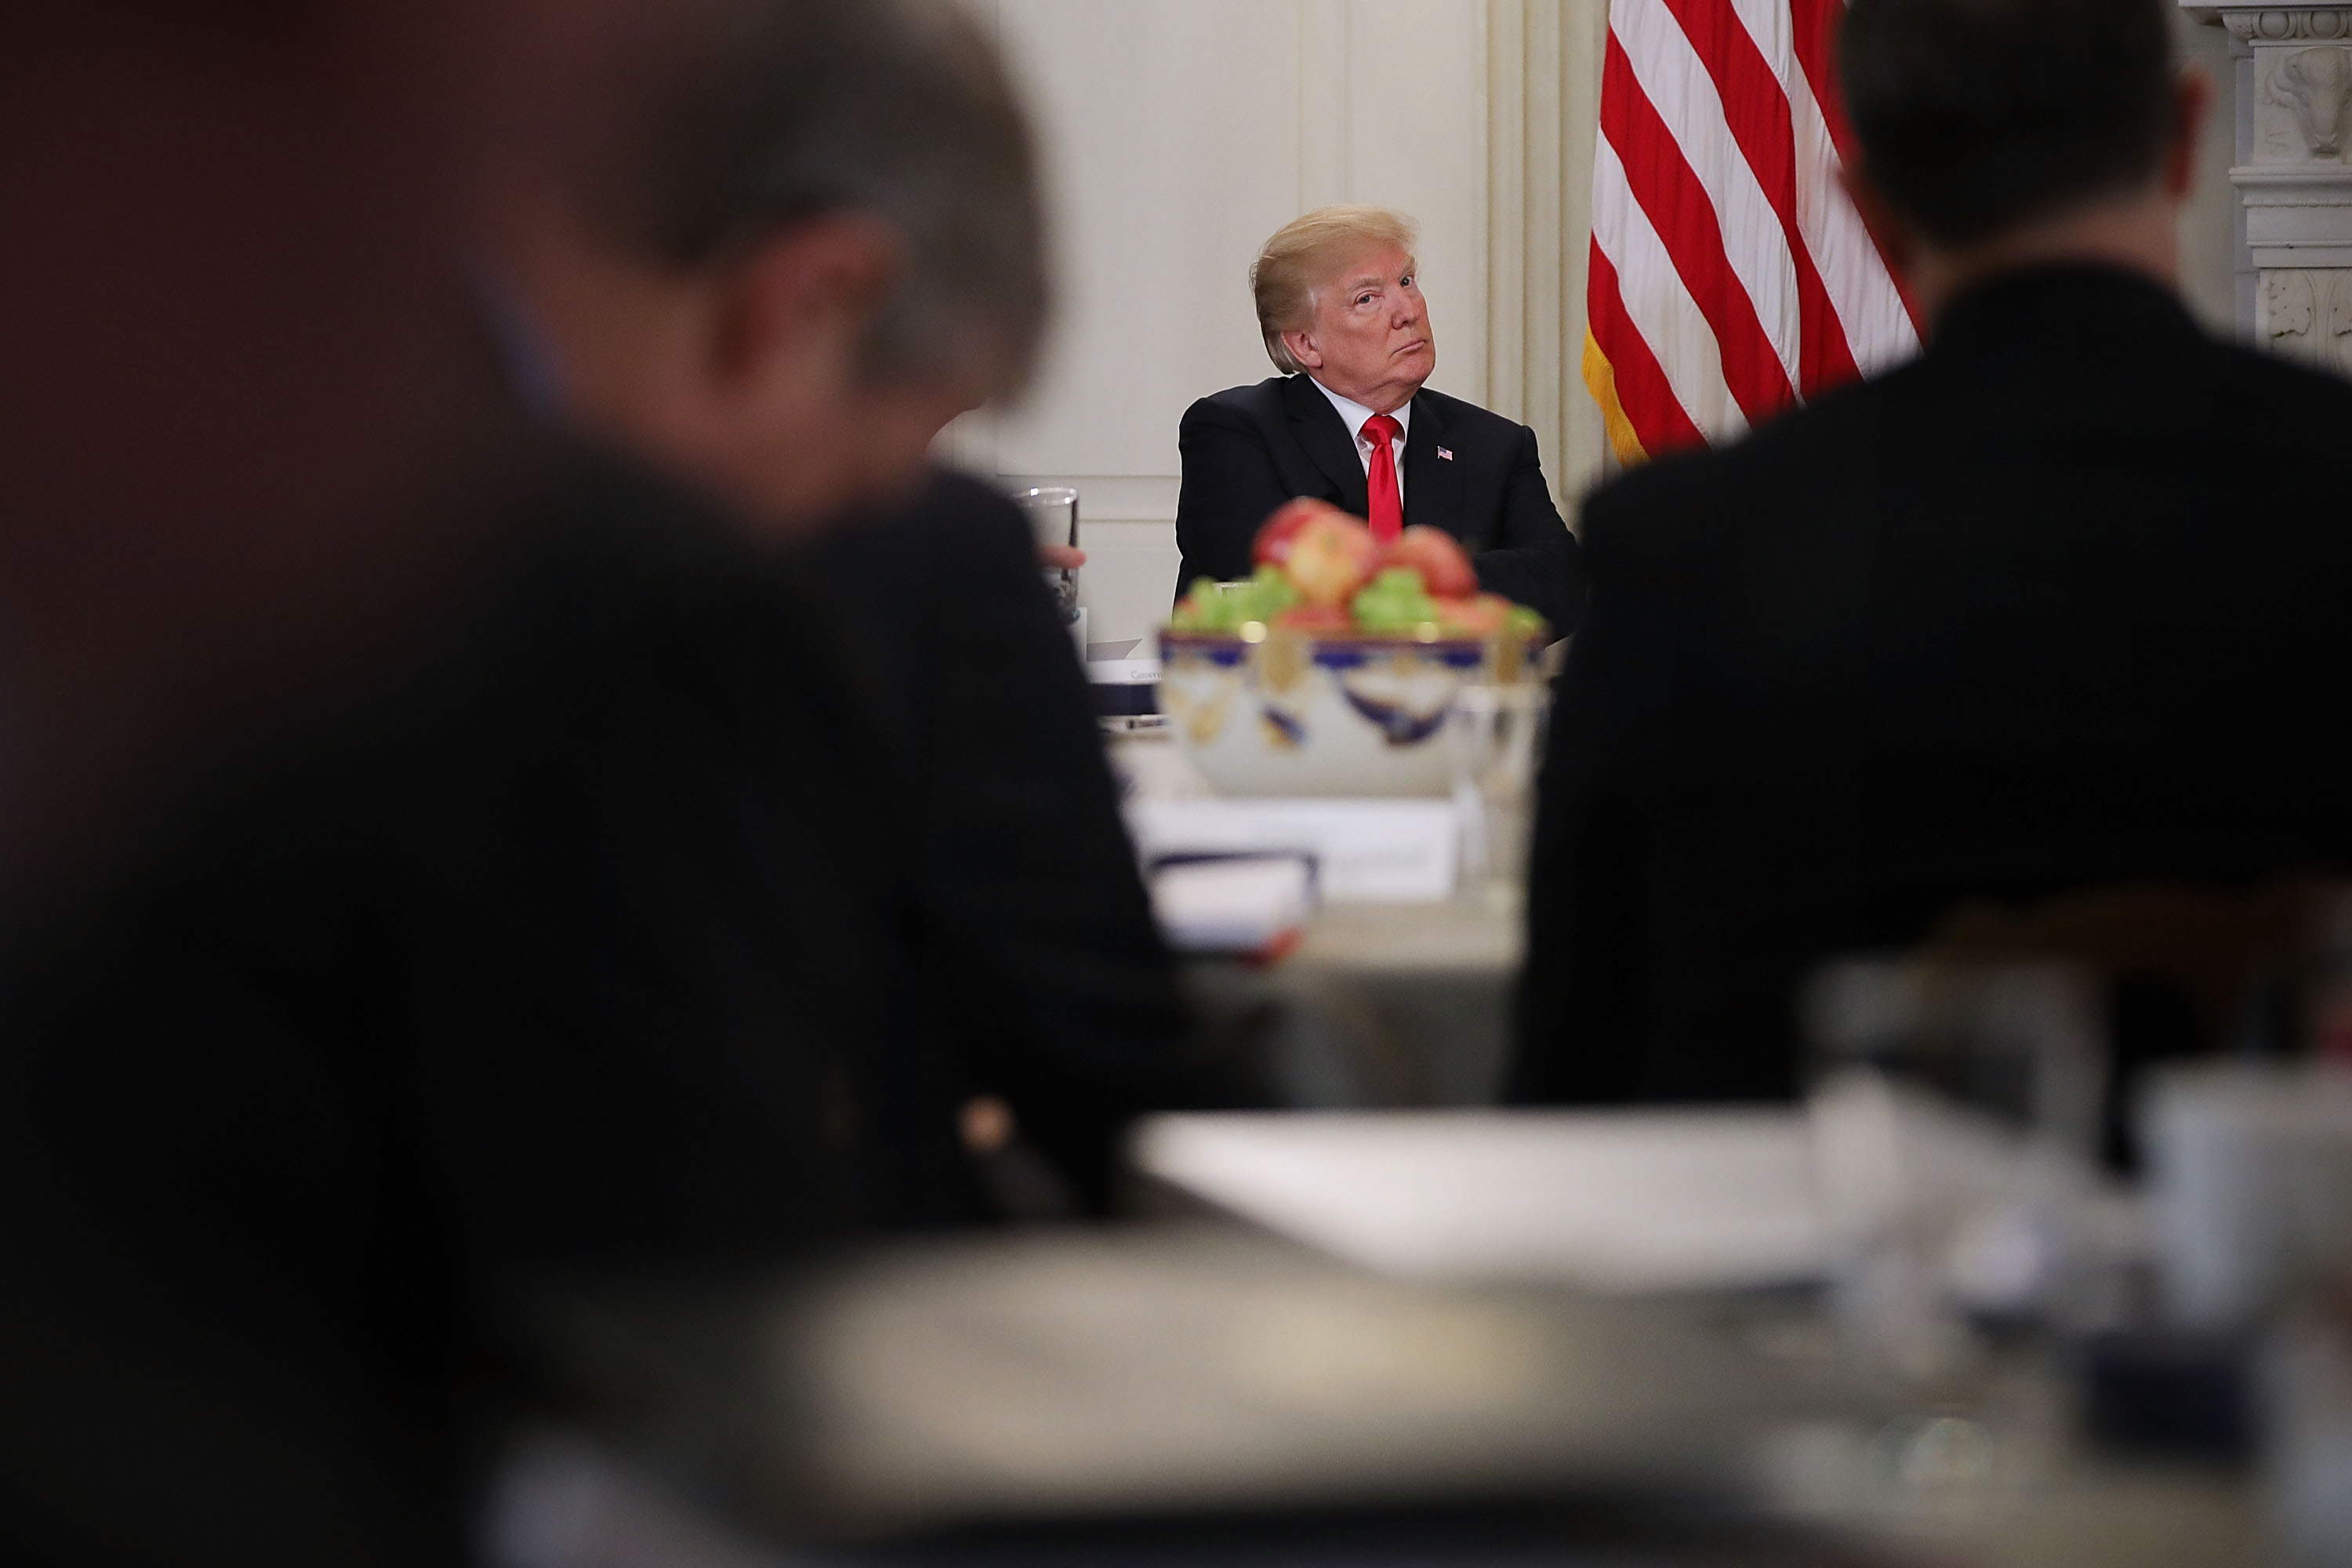 President Trump at a meeting at the White House